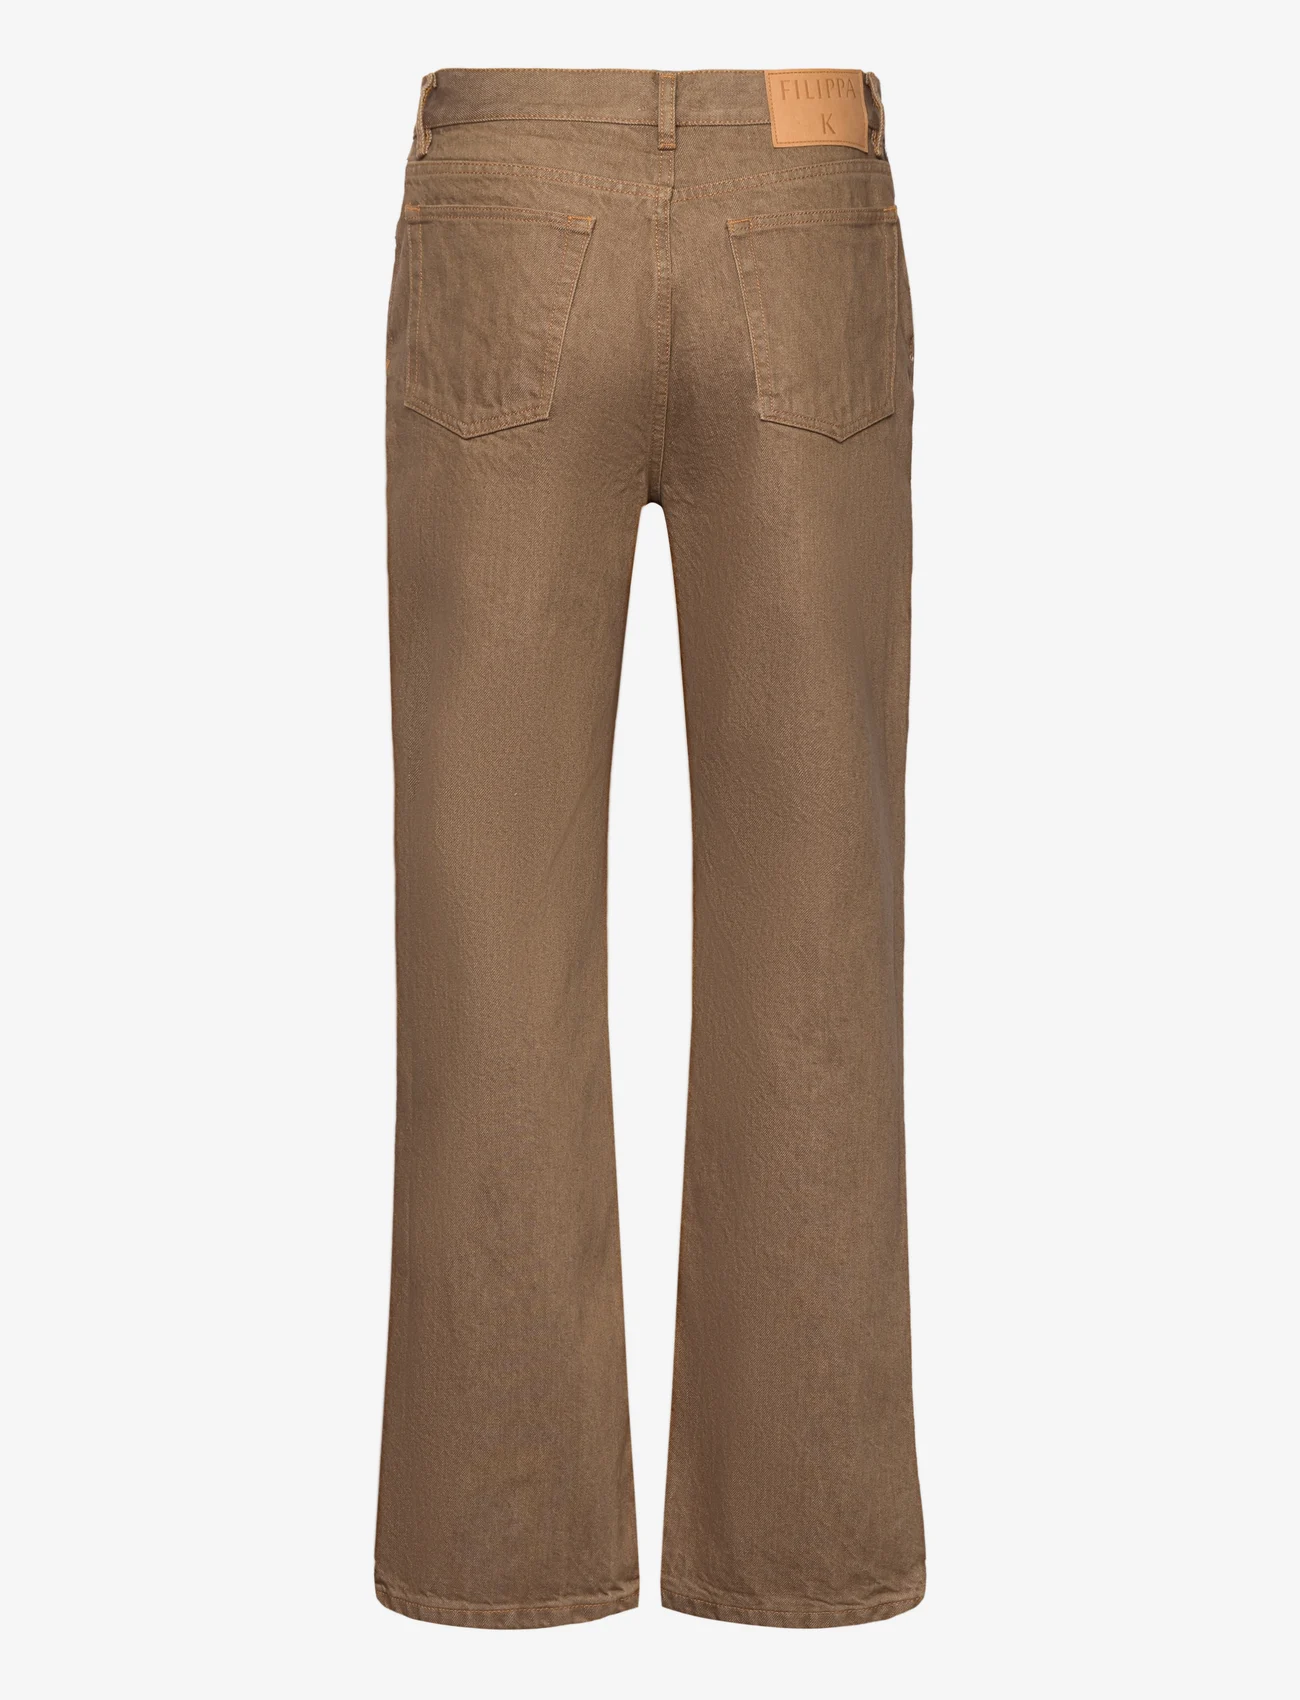 Filippa K - Bootcut Jeans - relaxed fit -farkut - cane brown - 1